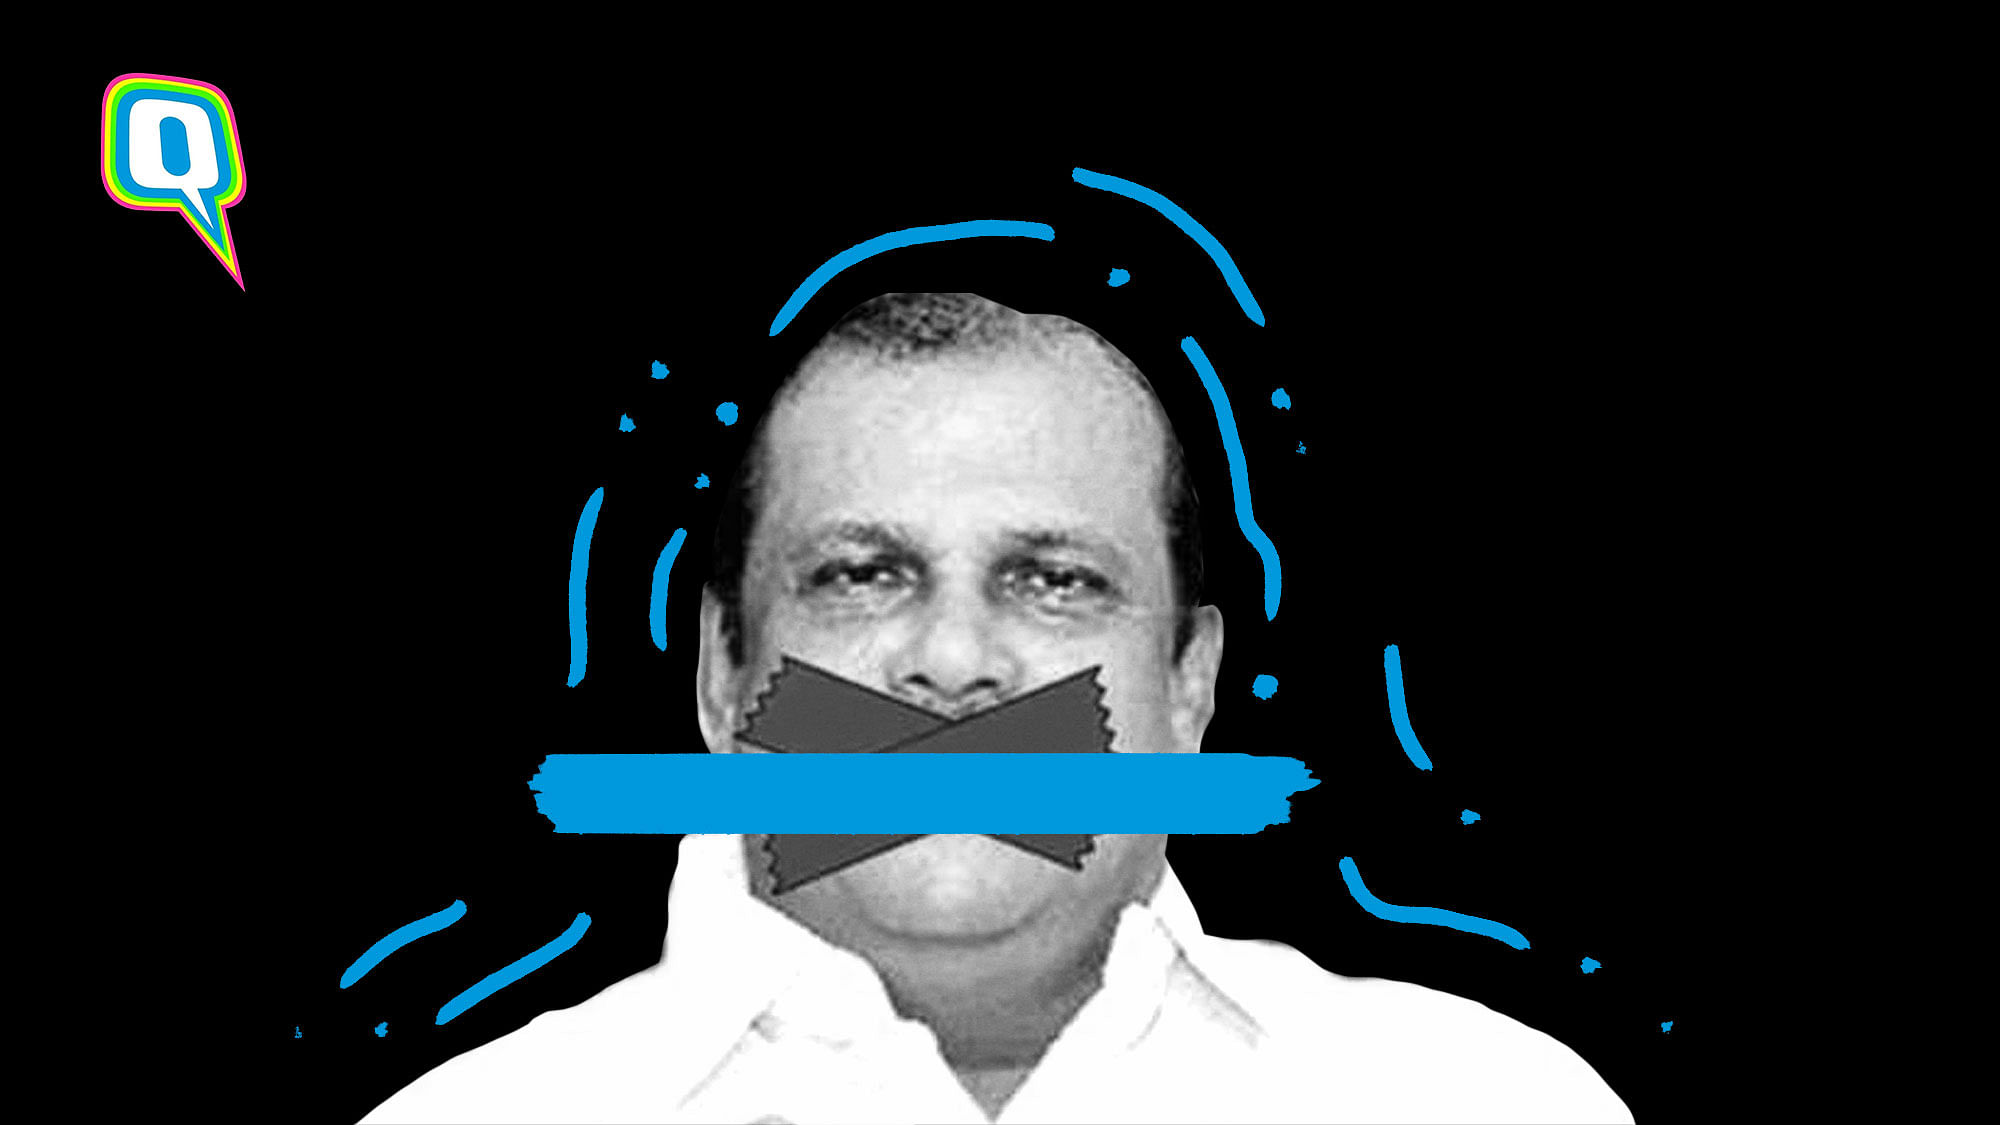 PC George, the Kerala MLA who called the survivor a “prostitute”, and was shut on Twitter through a #ShutYourMouthCampaign